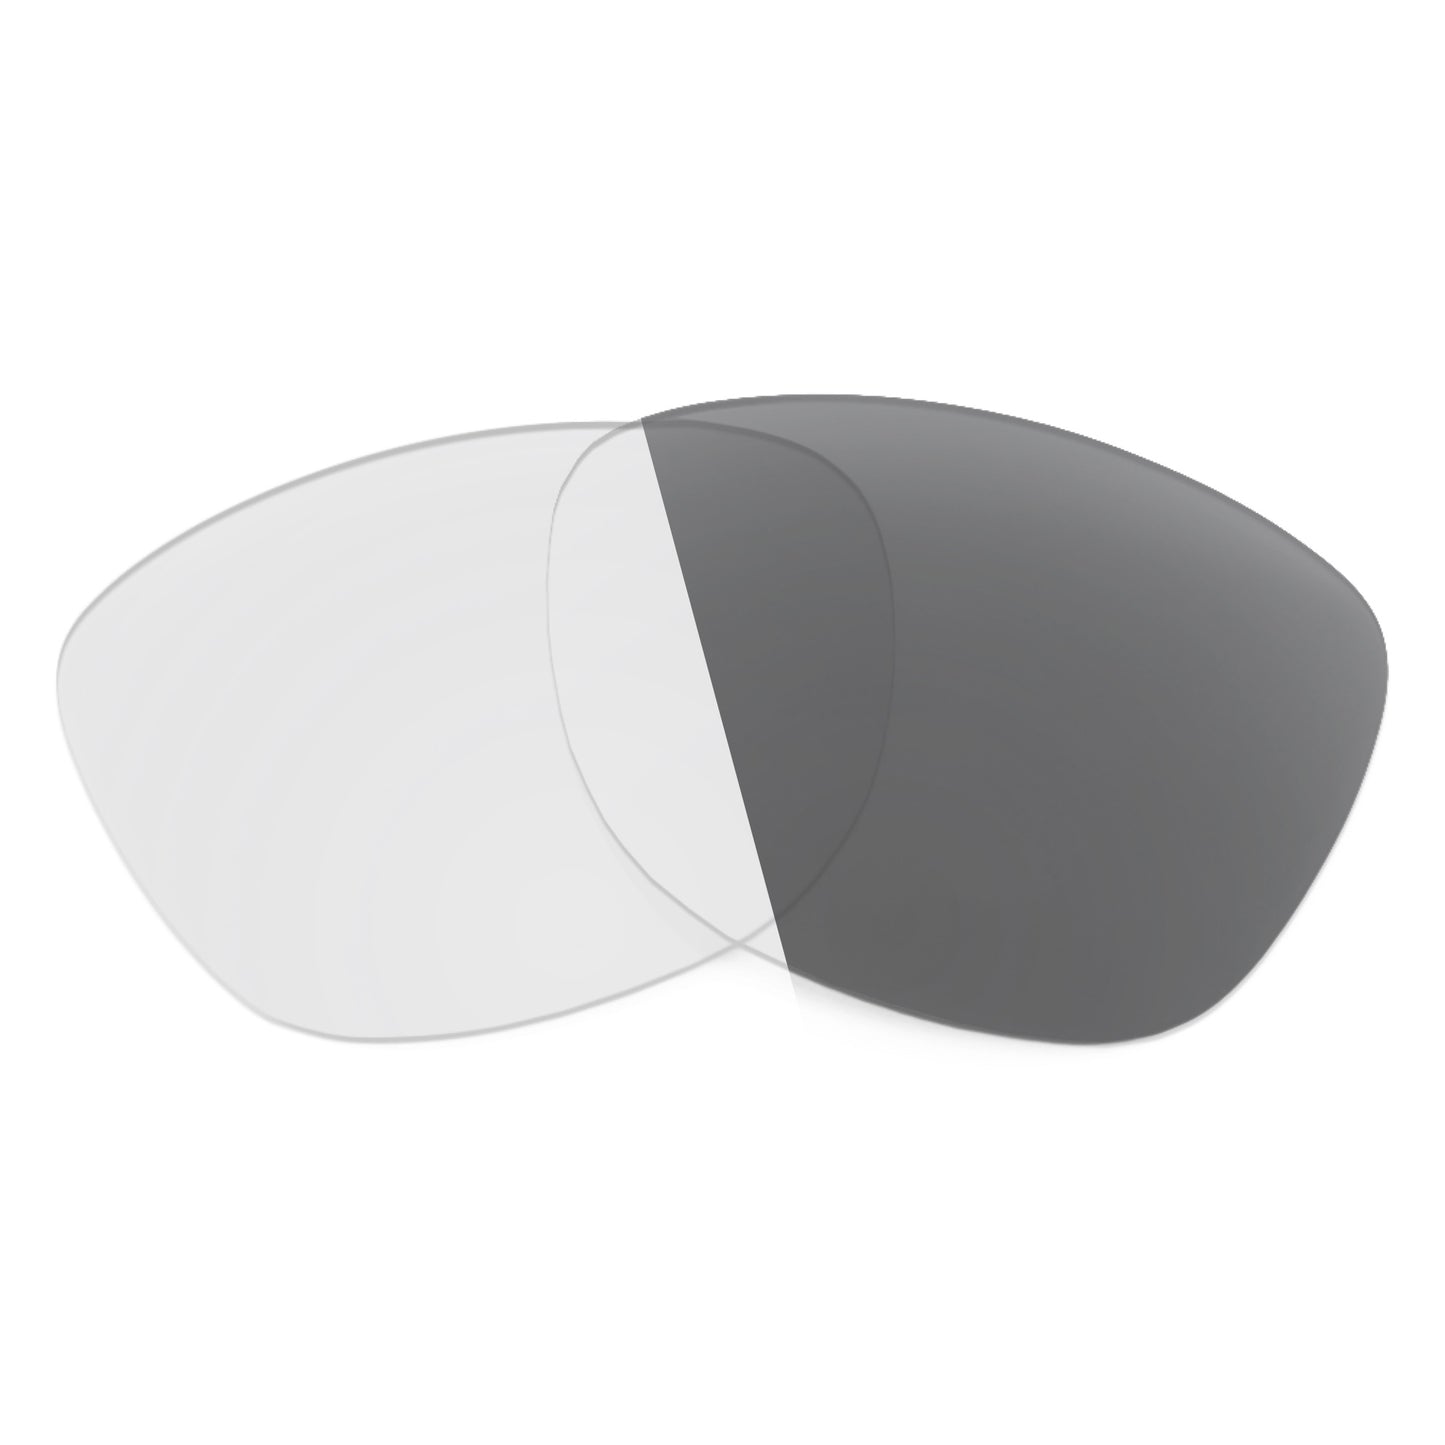 Revant replacement lenses for Ray-Ban Justin Classic RB4165 55mm Non-Polarized Adapt Gray Photochromic